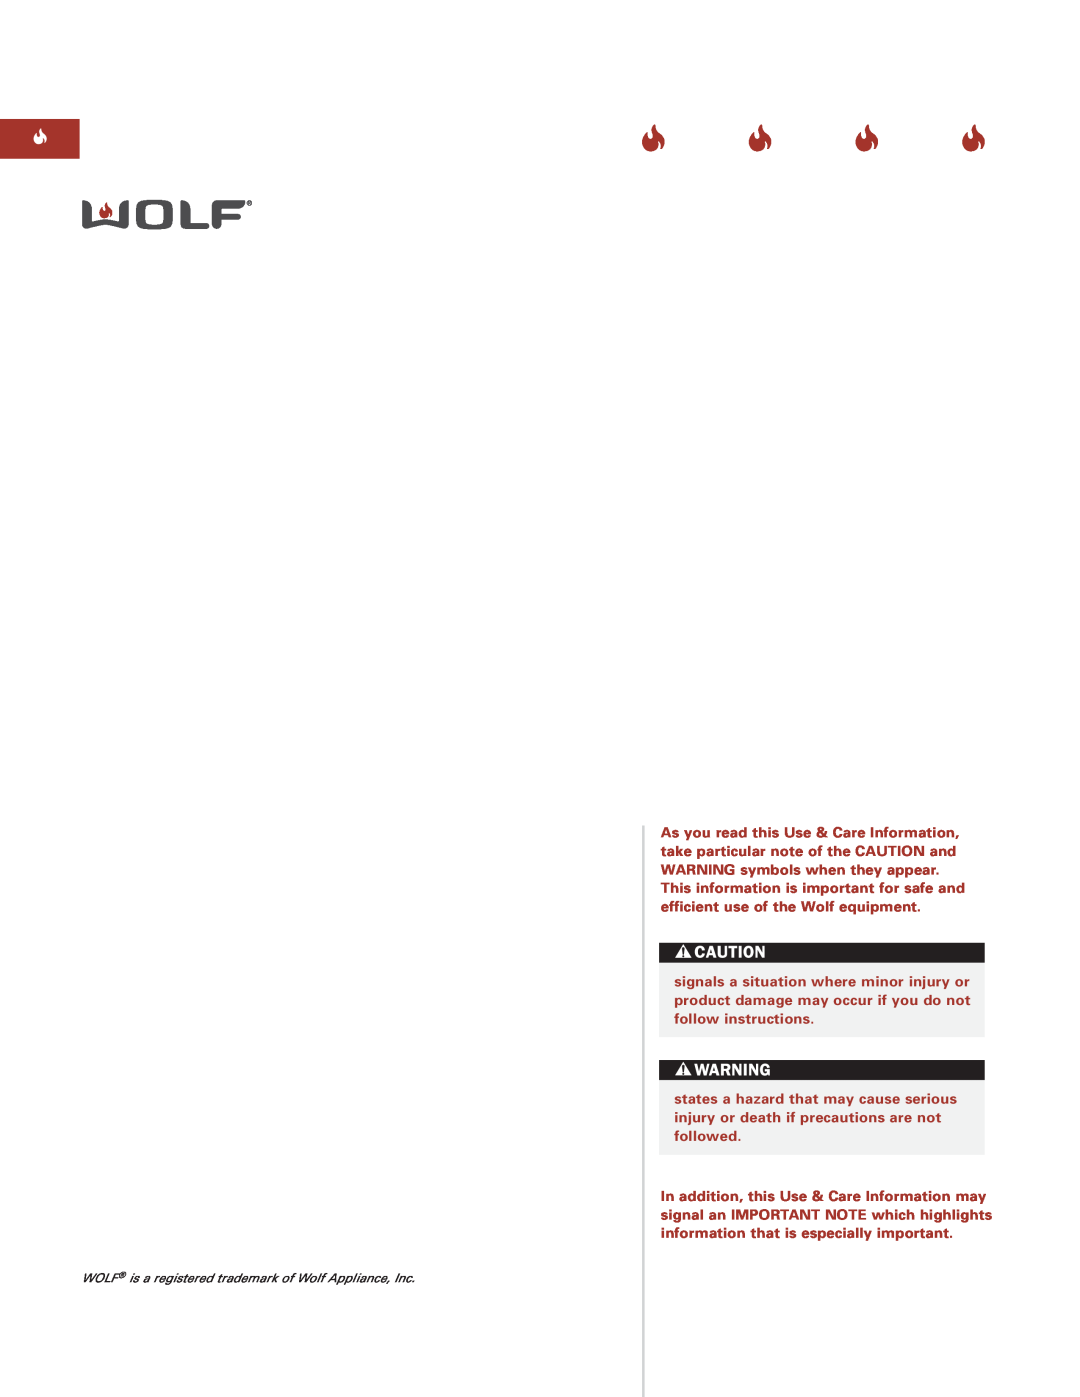 Sub-Zero ICBCT15G manual WOLF is a registered trademark of Wolf Appliance, Inc 